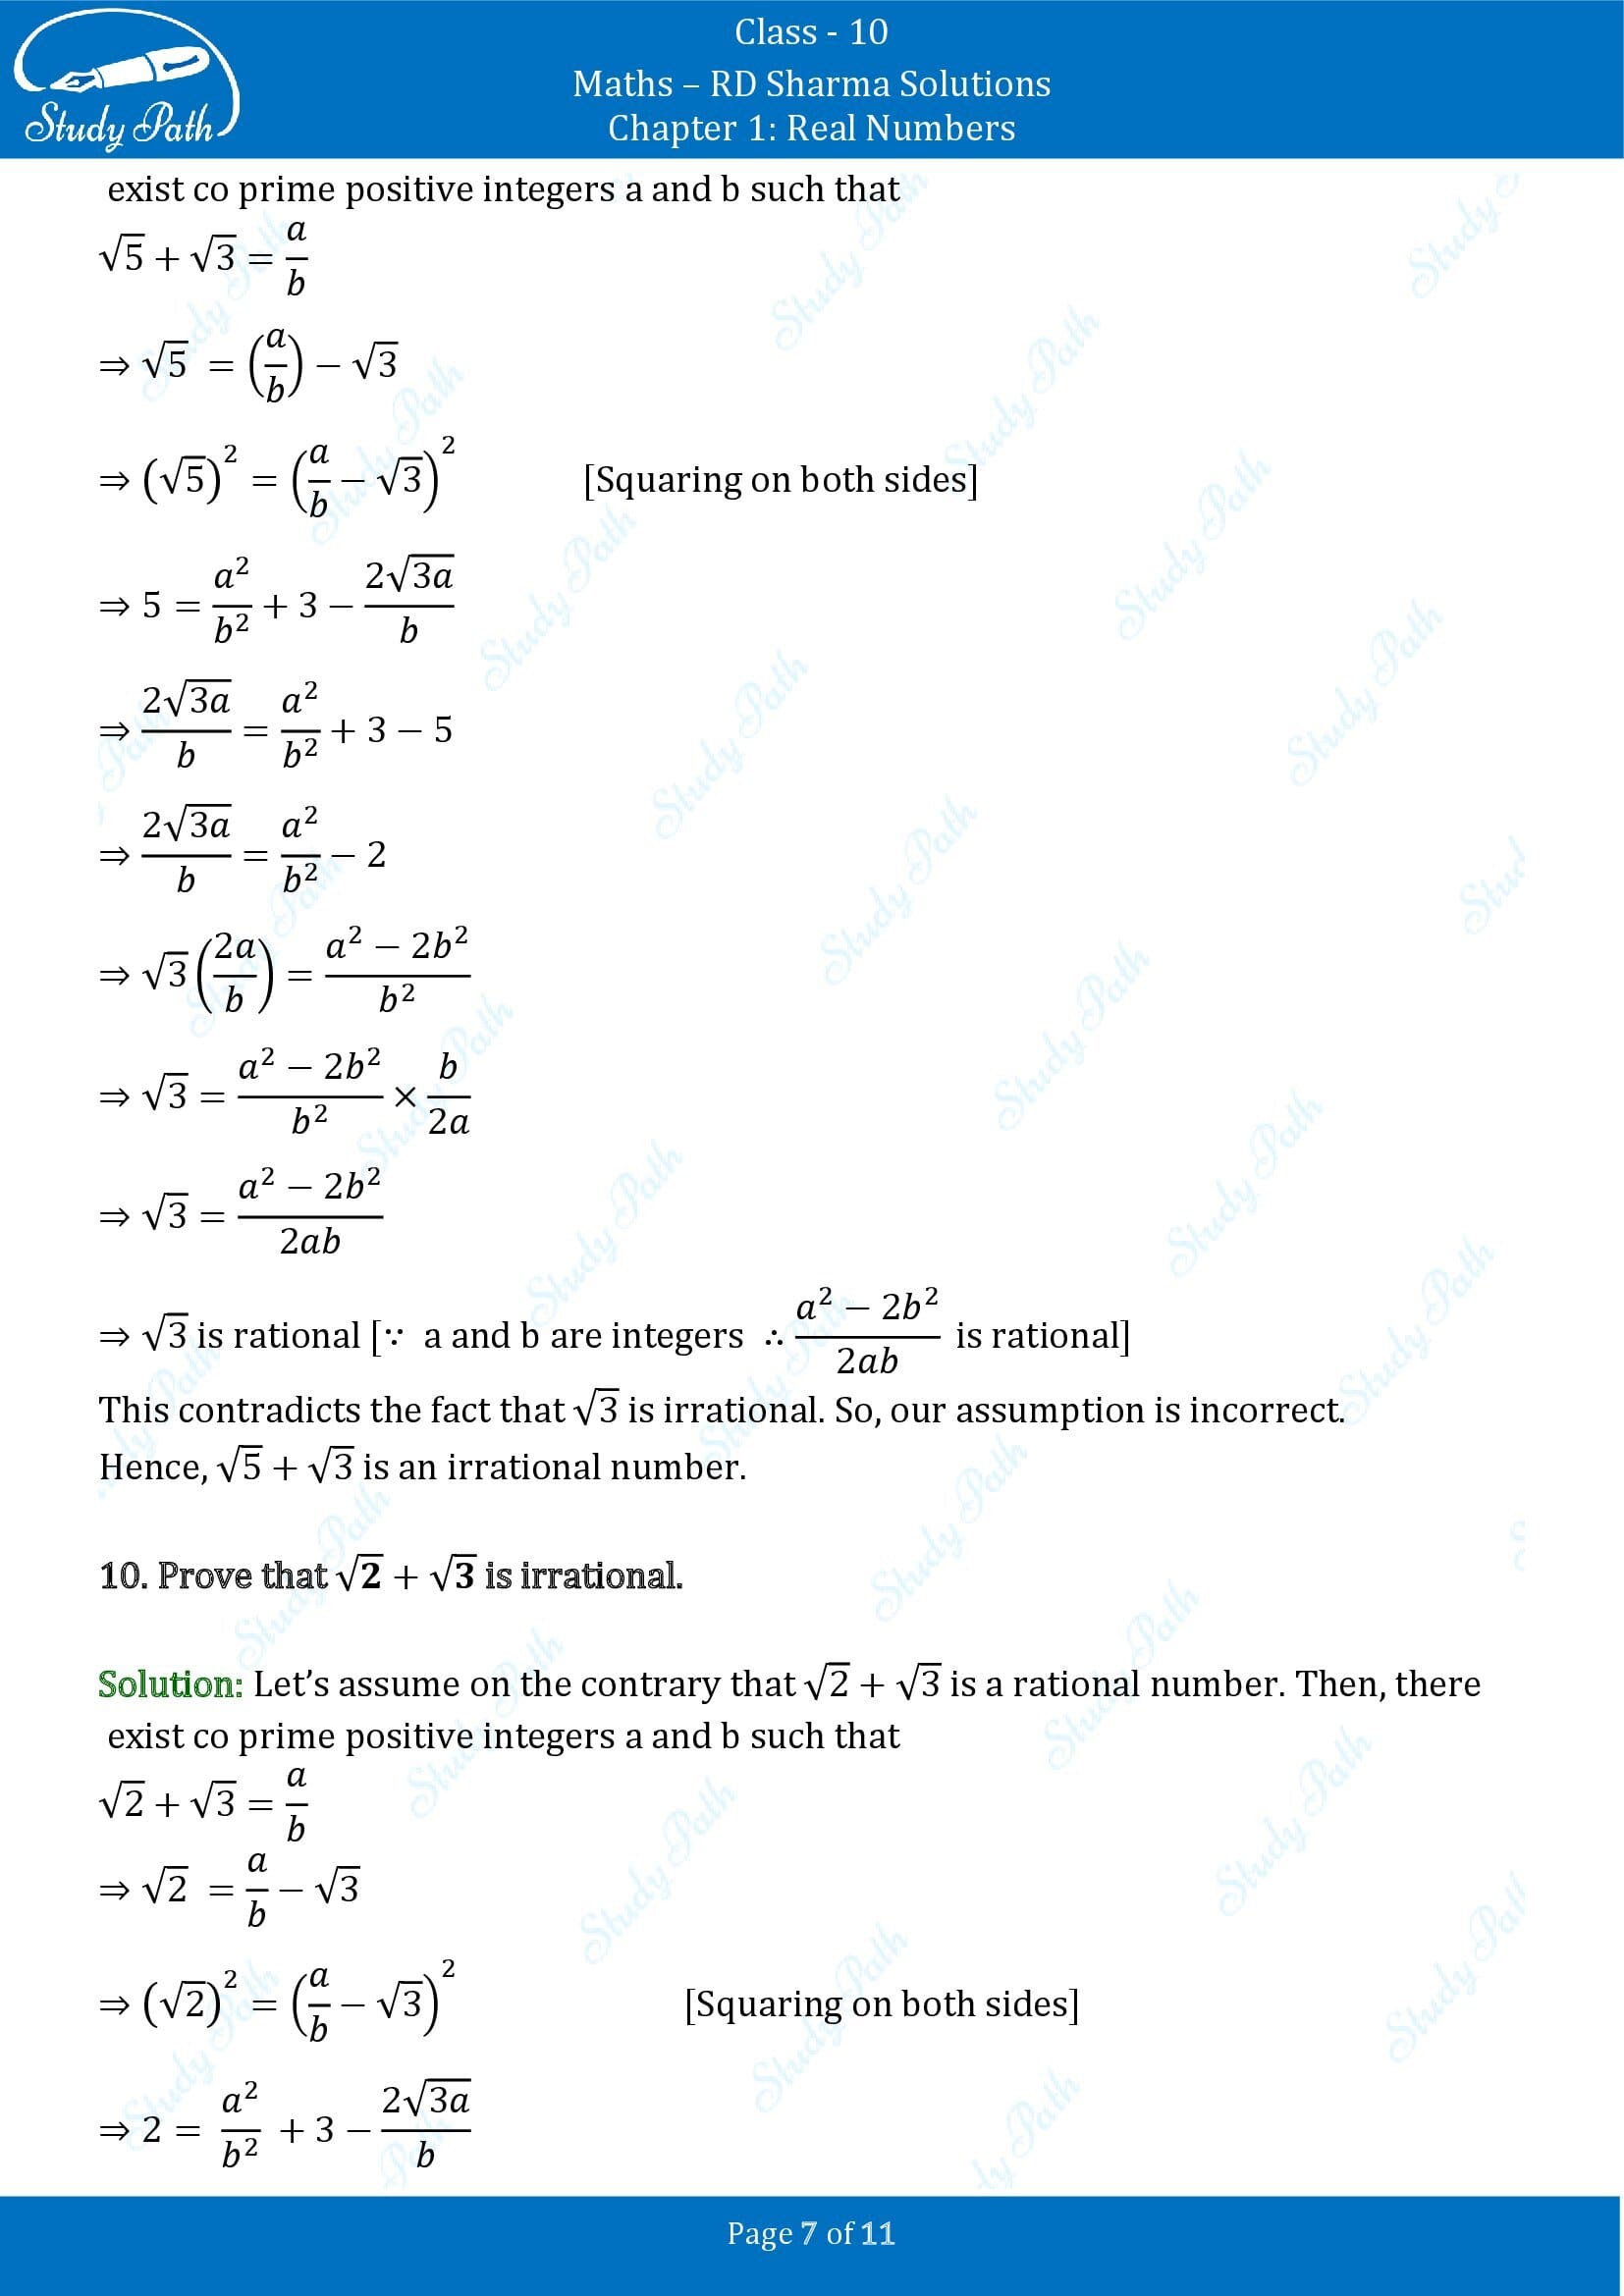 RD Sharma Solutions Class 10 Chapter 1 Real Numbers Exercise 1.5 00007